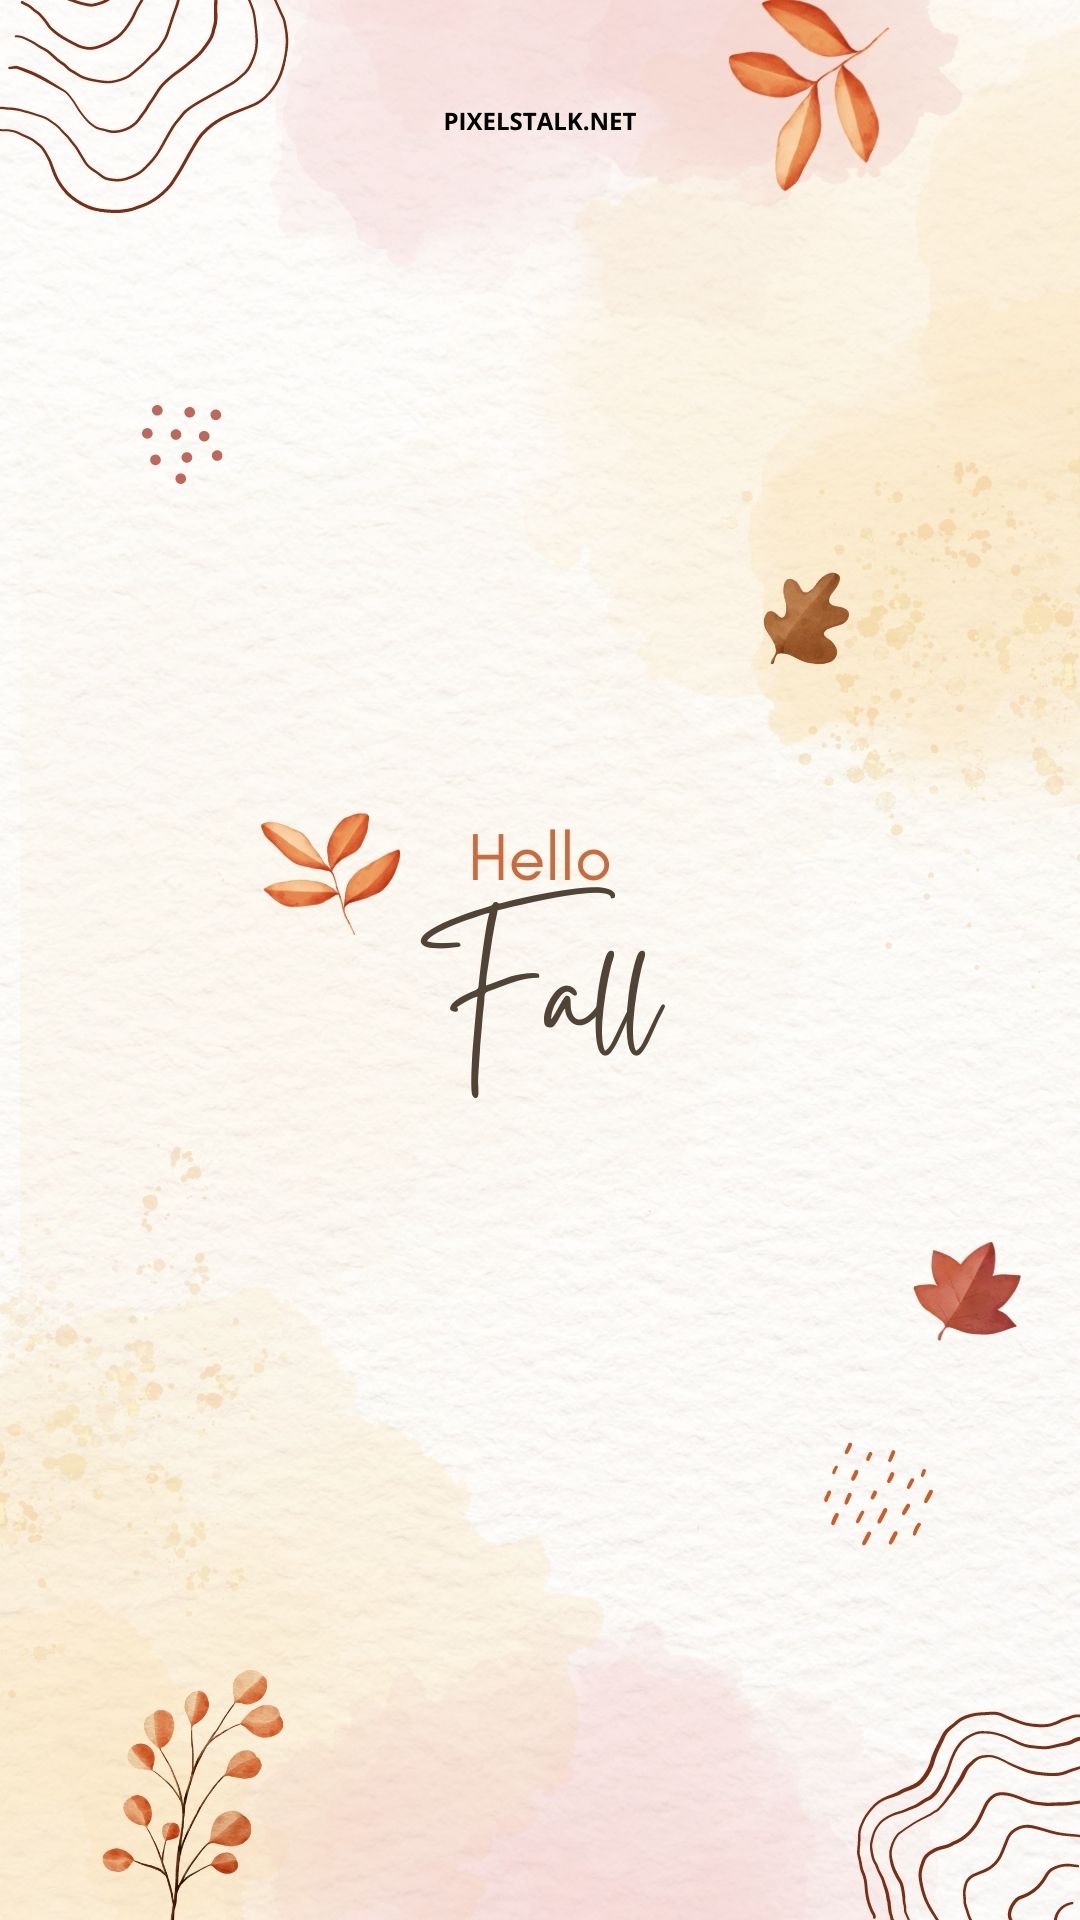 Hello Fall phone wallpaper with a watercolor background - Cute fall